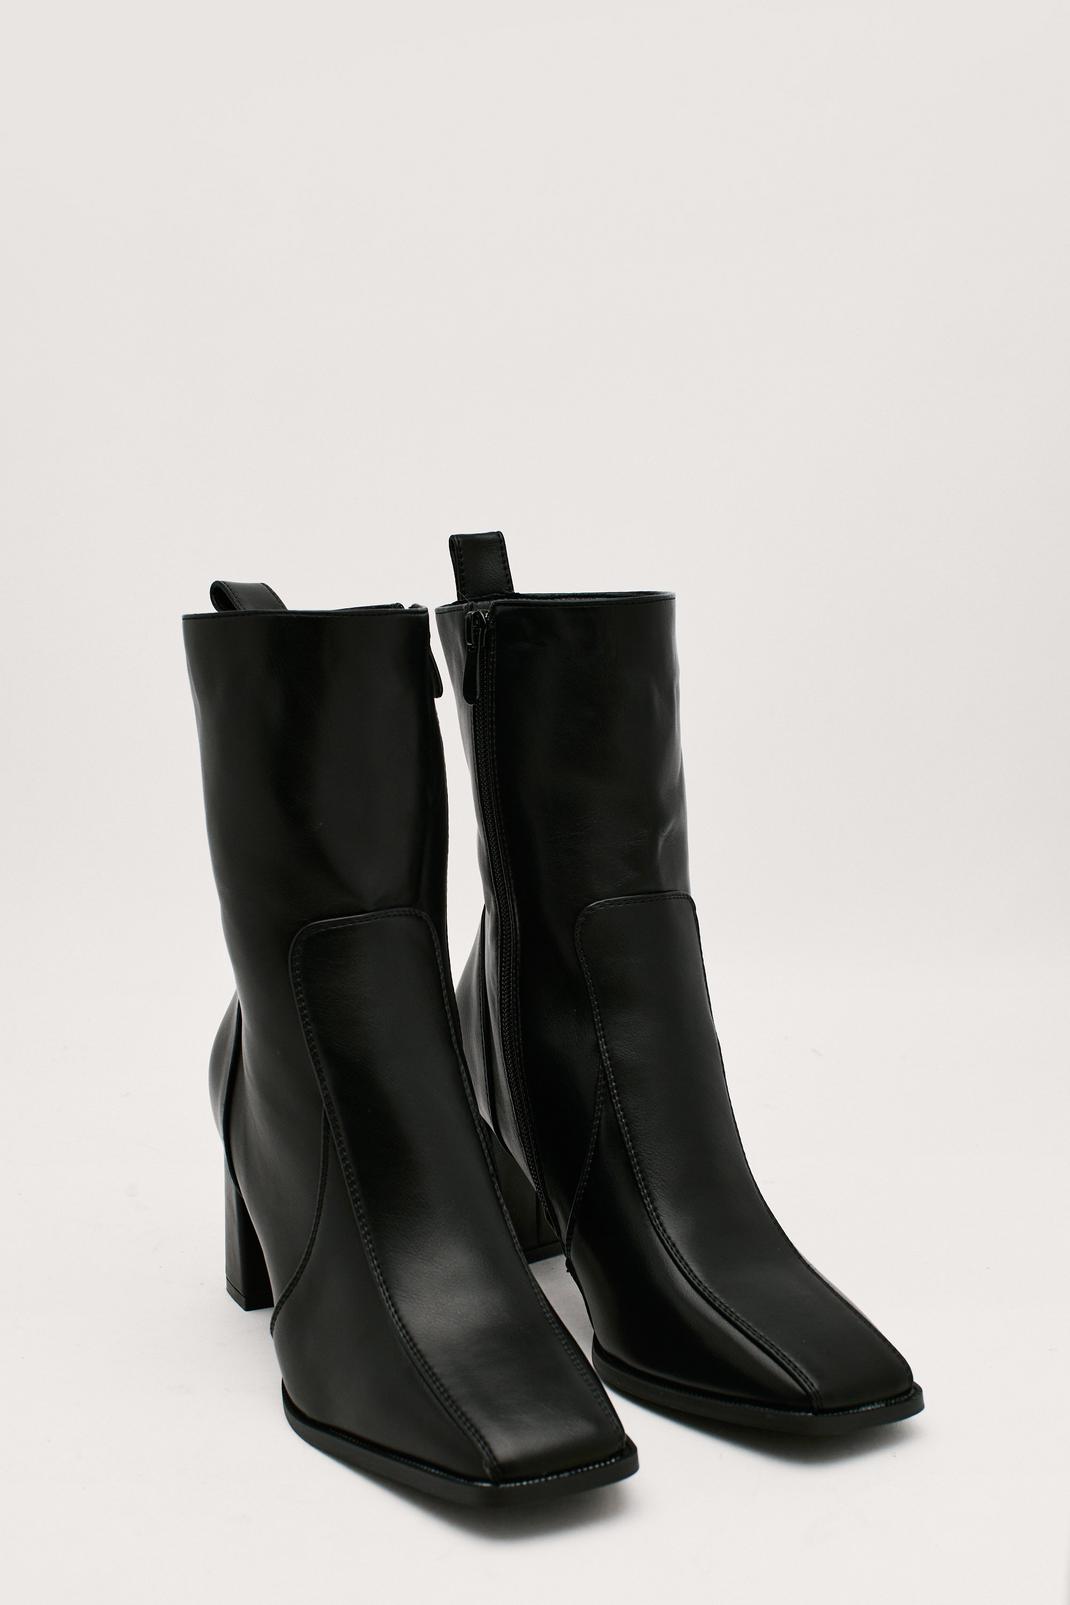 Black Faux Leather Block Heel High Ankle Boots image number 1